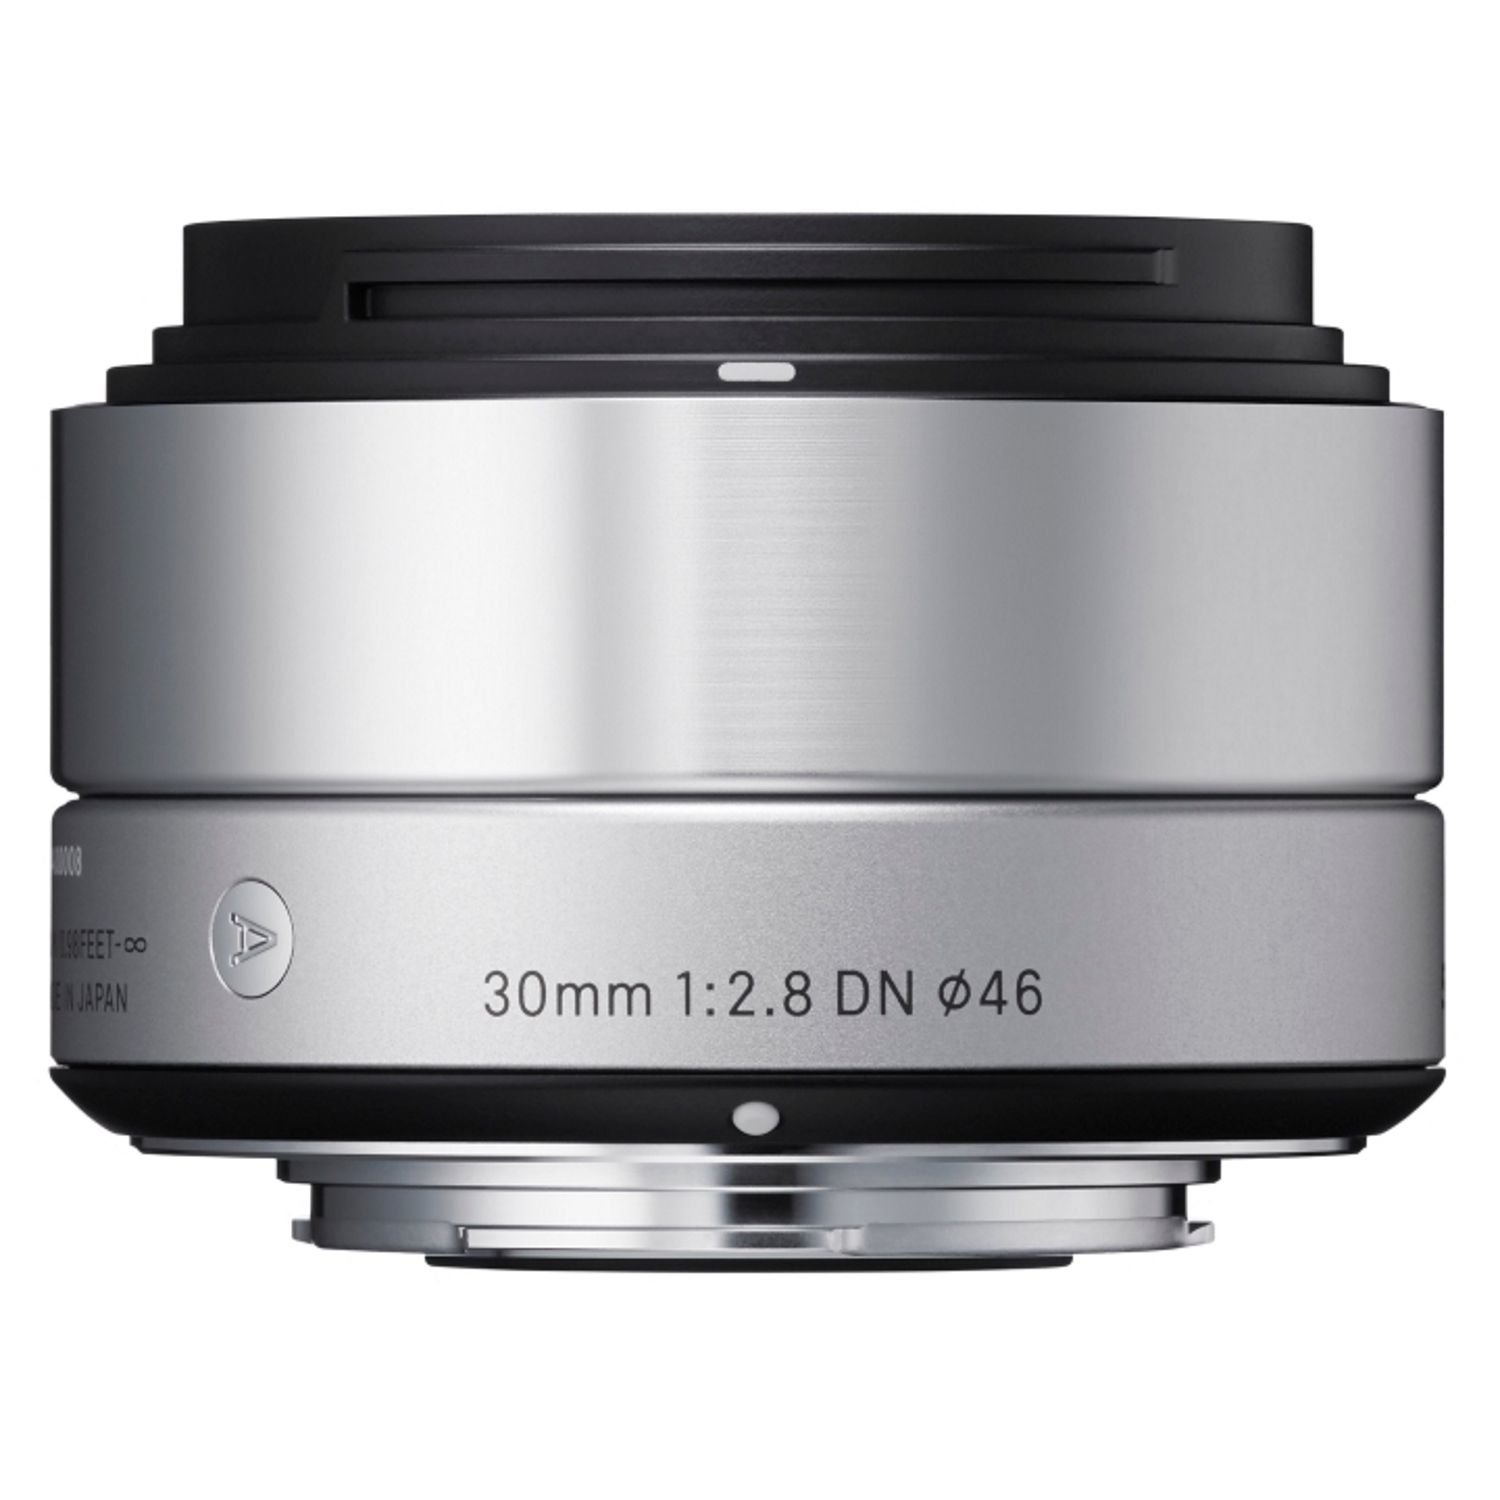 Sigma 30mm f/2.8 DN Silver Art Lens for Micro Four Thirds